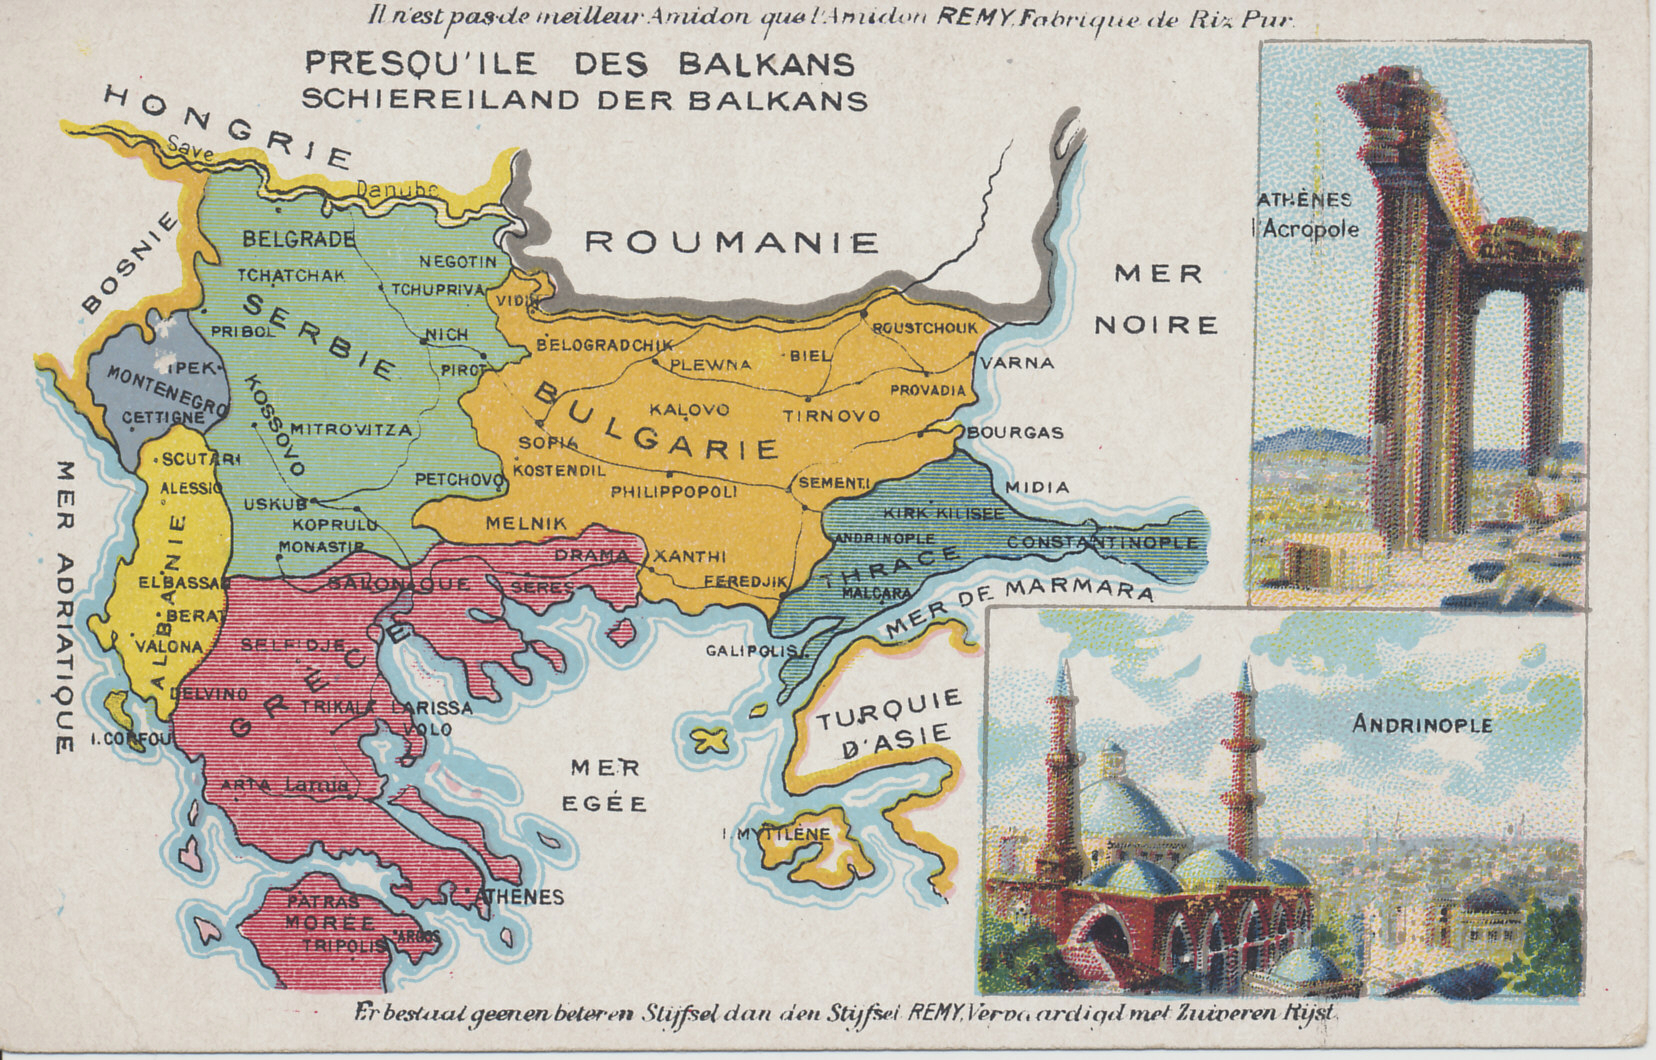 Advertising postcard map of the Balkans from the Amidon Starch company — Serbia, Montenegro, Bulgaria, Albania, Greece, and Turkey in Europe — with images of the Acropolis in Athens and Andrinople in Turkey. The map shows the region after the Second Balkan War.
Text:
Demandez L'Amidon REMY en paquets de 1, 1/2 et 1/4 kg.
Vraagt het stijfsel REMY in pakken van 1, 1/2 et 1/4 ko.
Ask for REMY Starch in packages of 1, 1/2, and 1/4 kg.
Text in French and Dutch:
Il n'est pas de meilleur Amidon que l'Amidon REMY, Fabrique de Riz Pur.
Er bestaat geenen beteren Stijfsel dan den Stijfsel REMY, Vervaardigd met Zuiveren Rijst.
(There is no better starch than Remy Starch, made of pure rice.)